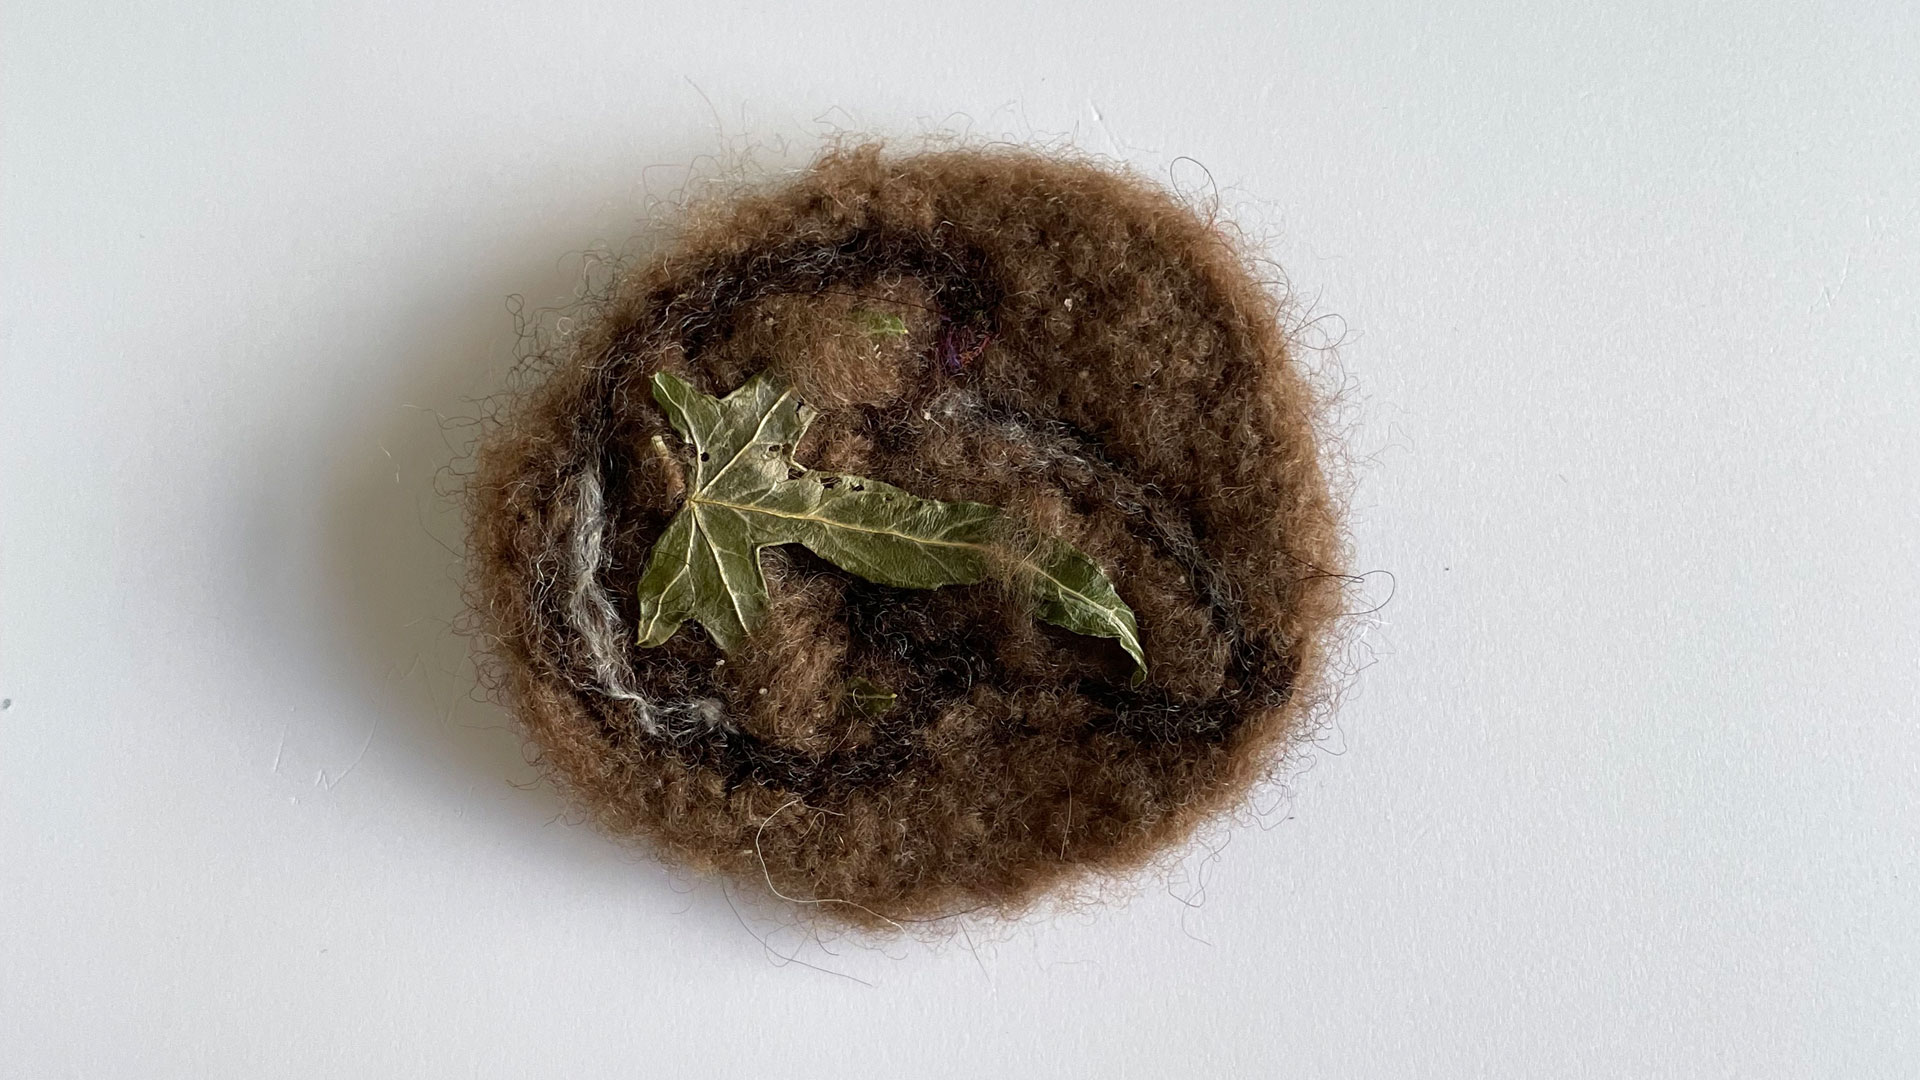 A circular brooch made of brown felted wool with a green ivy leaf embedded in the centre, on a white background